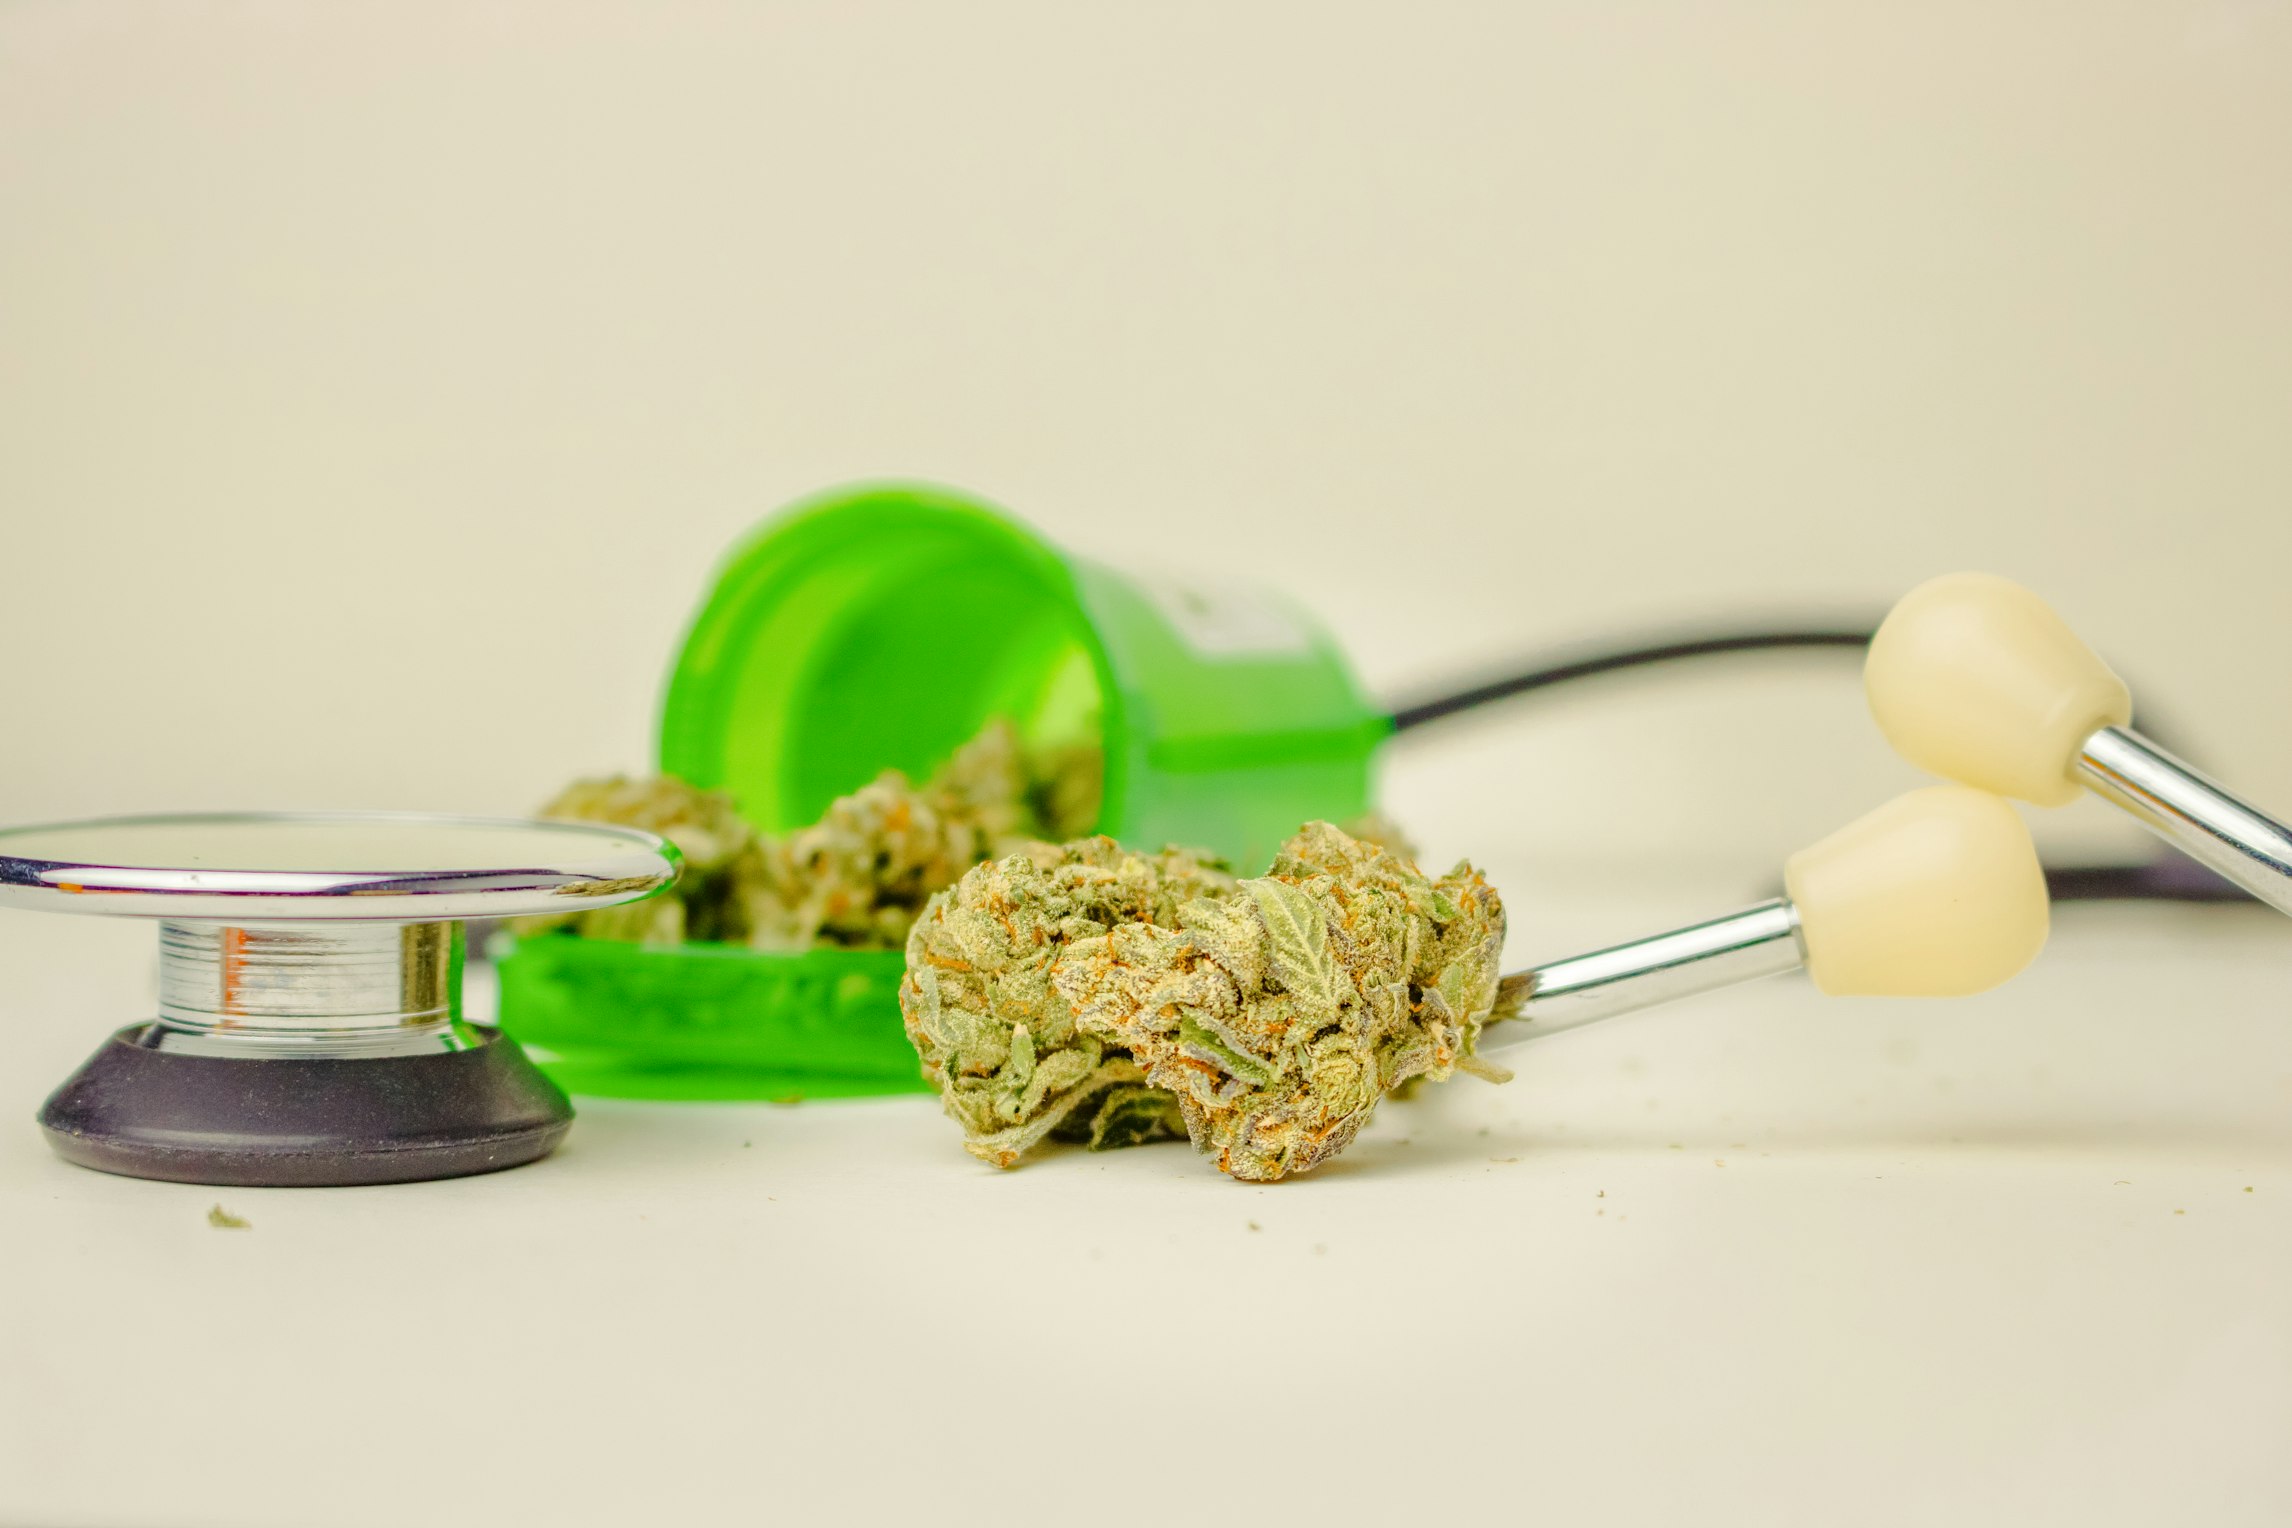 How to get a private cannabis prescription in the UK